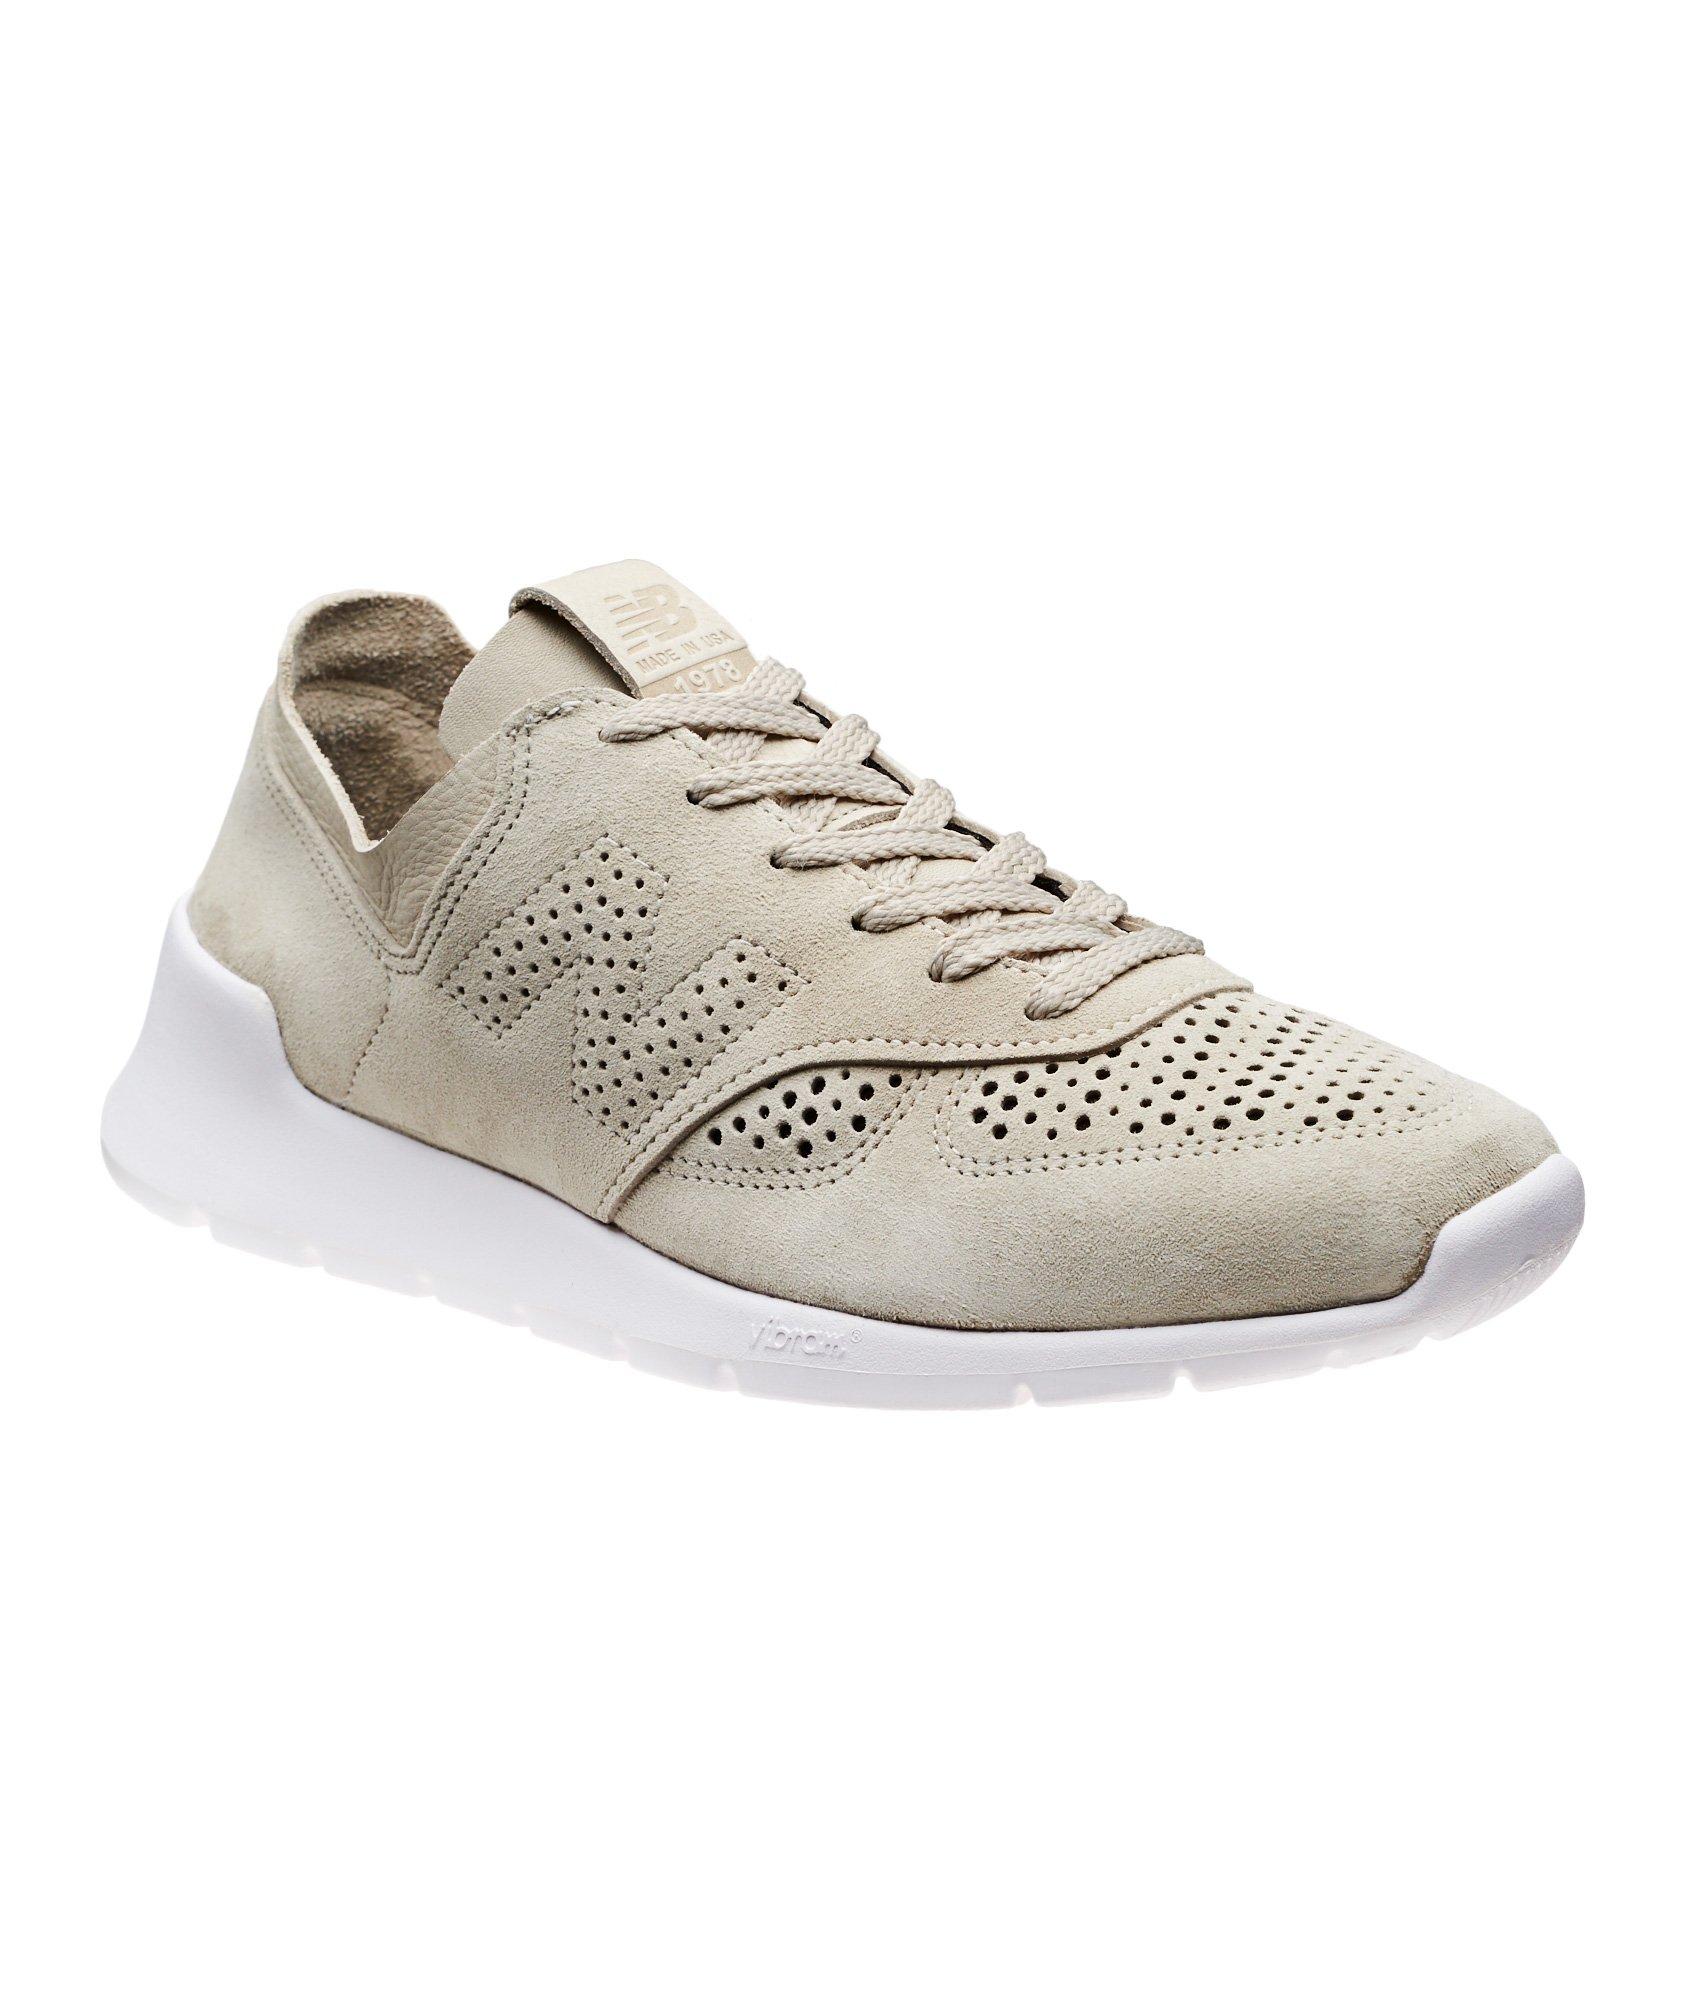 Perforated Leather Low-Tops image 0